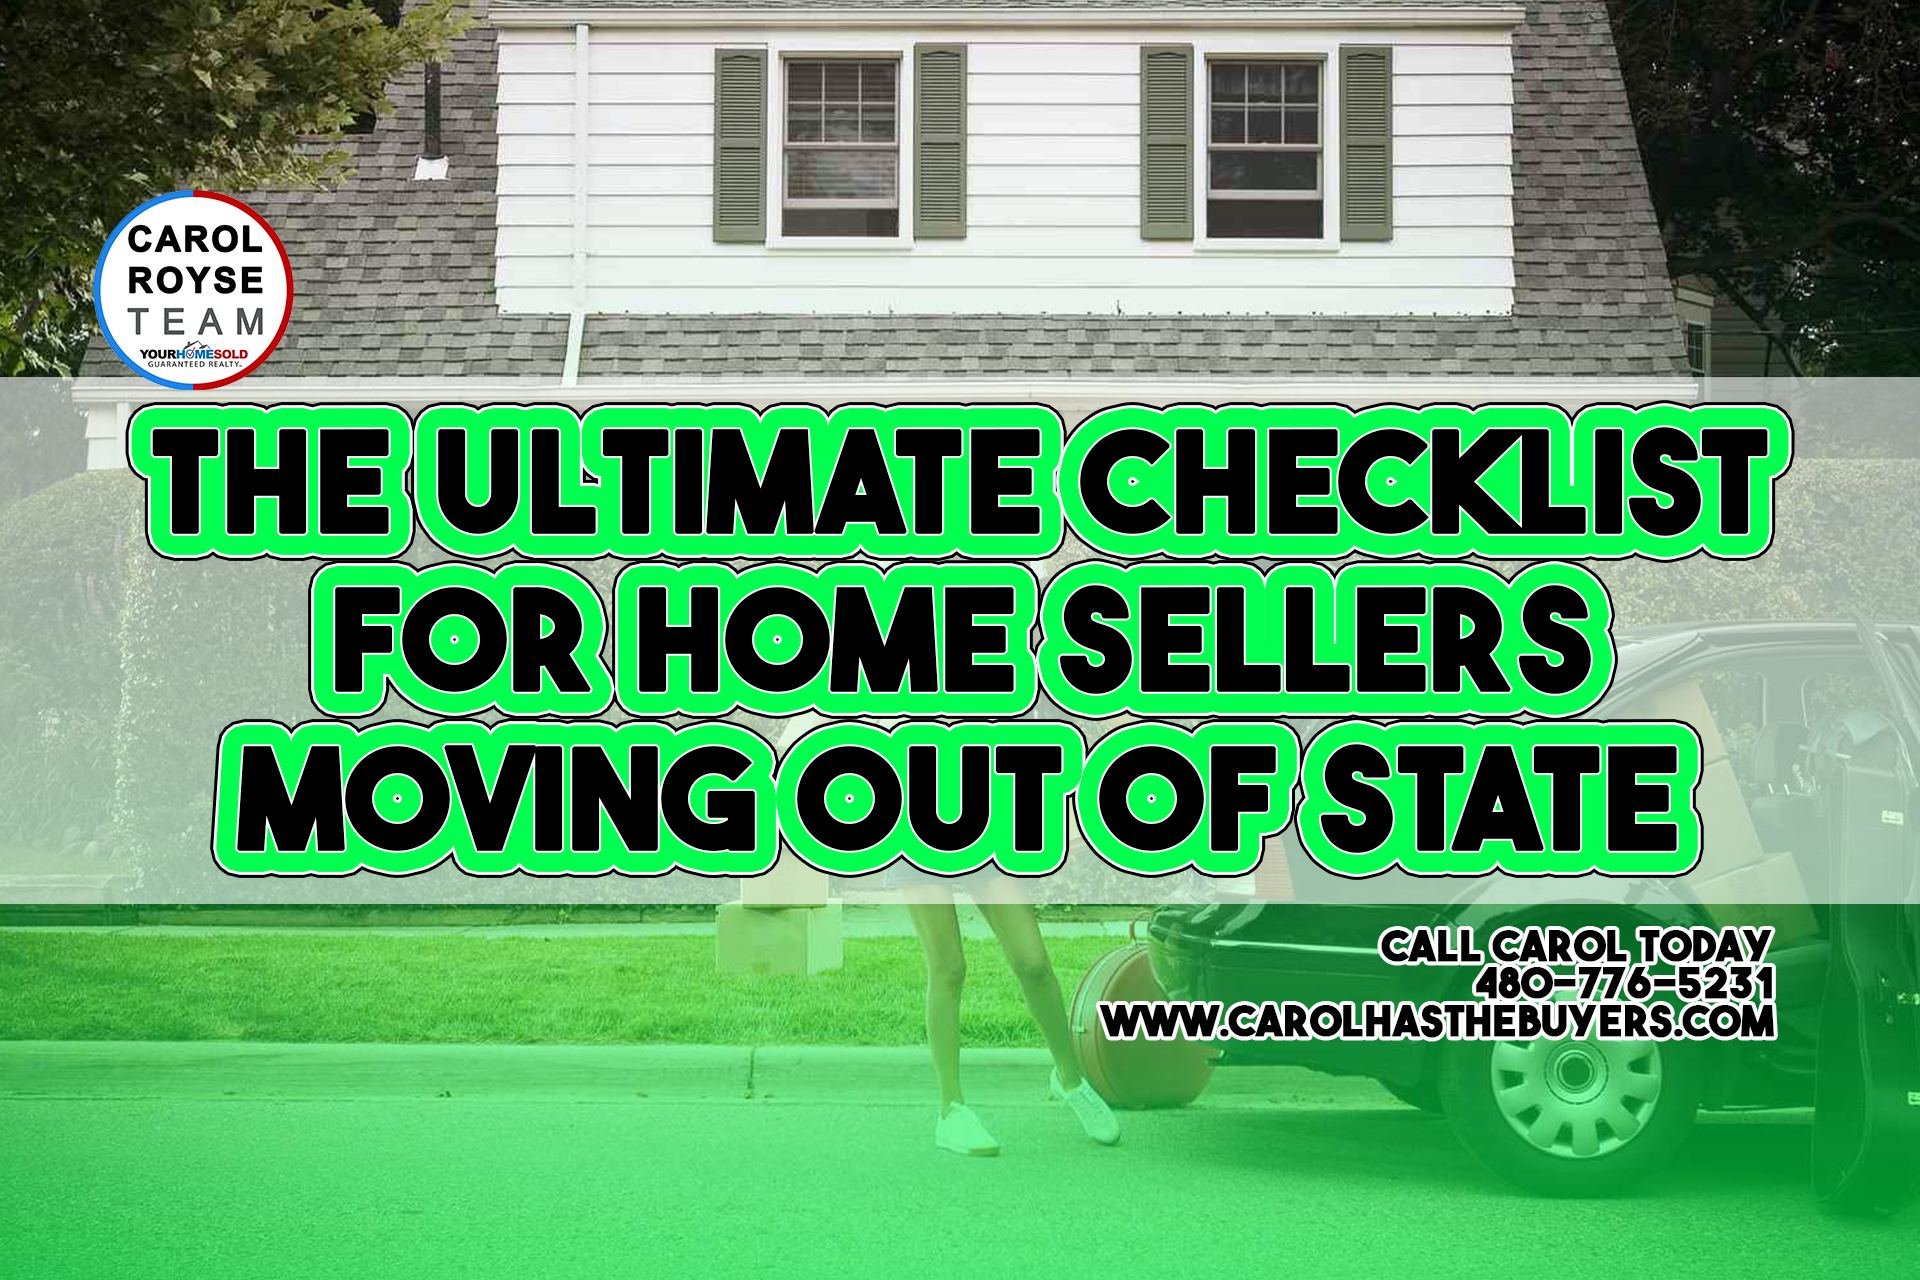 The Ultimate Checklist for Home Sellers Moving Out of State